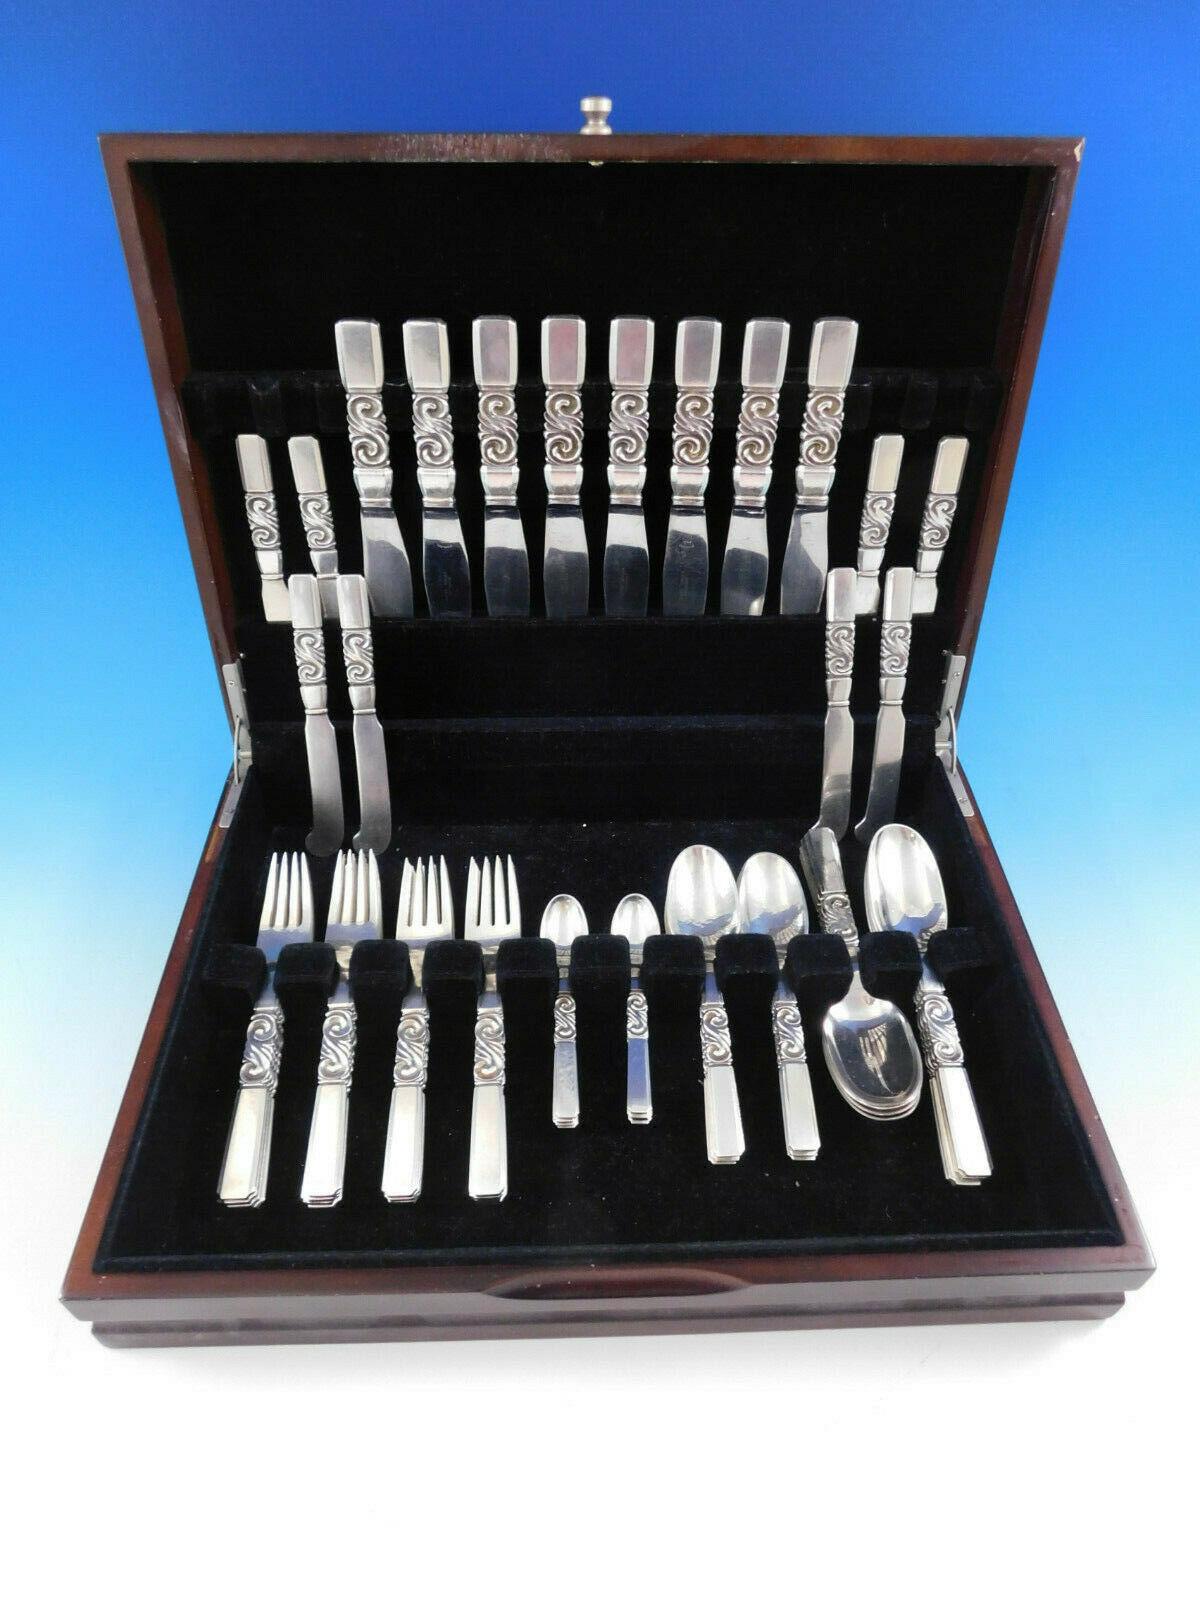 Superb scroll by Georg Jensen Danish sterling silver flatware set - 56 pieces. This set includes:

8 luncheon knives, 7 3/4